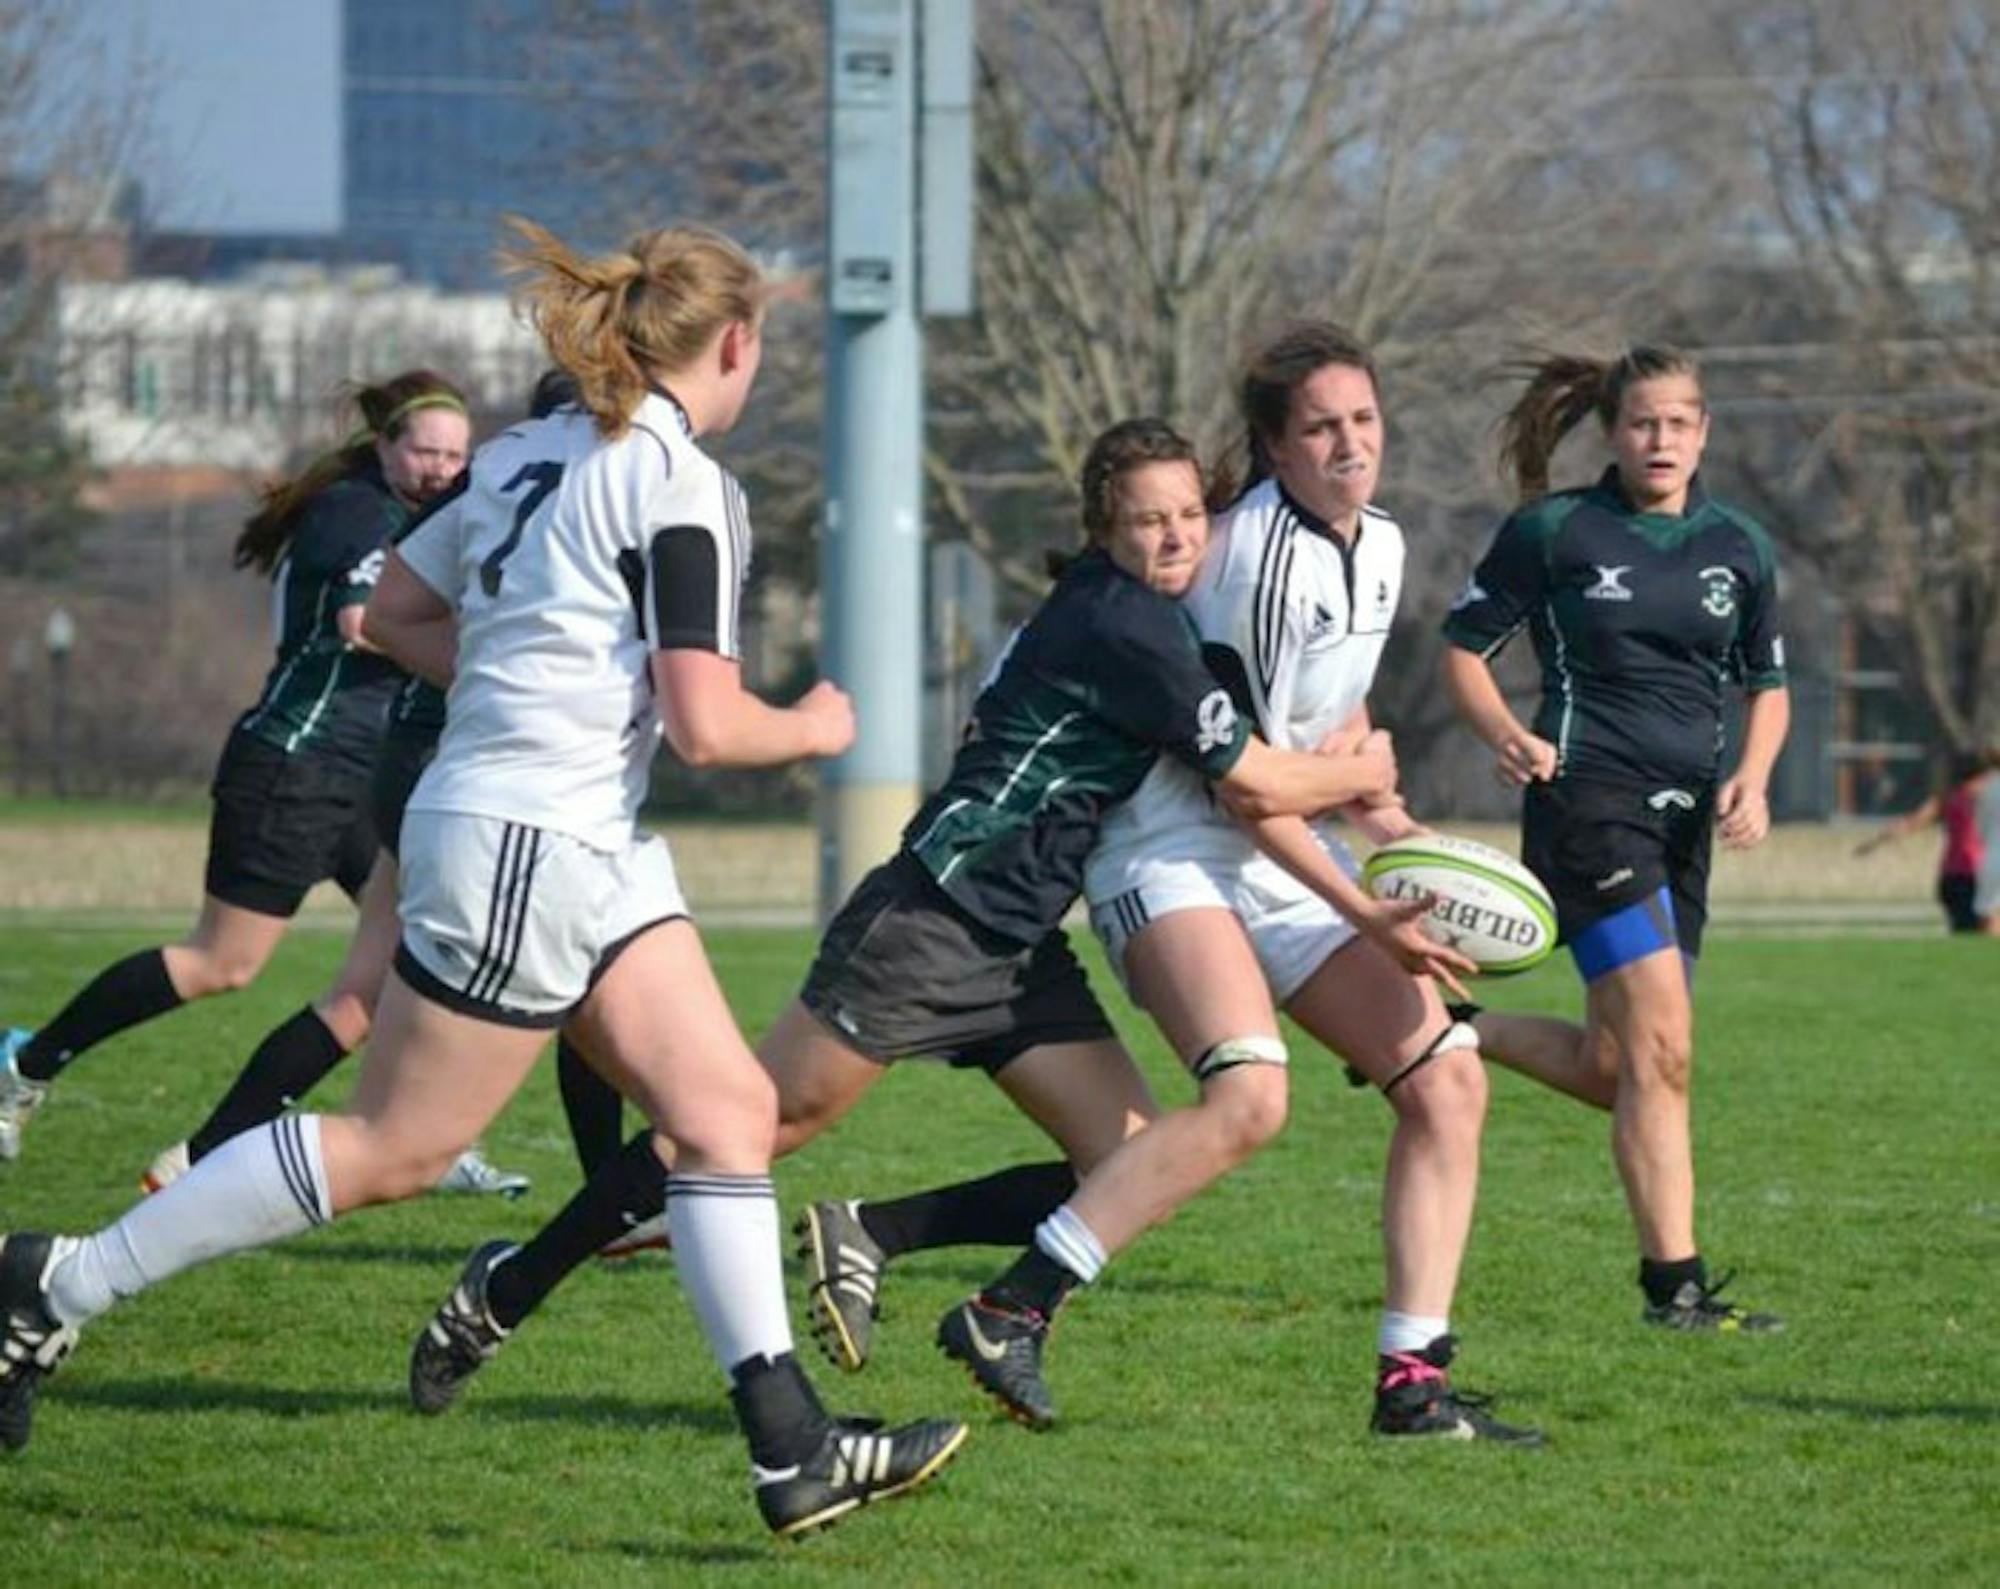 The Notre Dame women’s rugby club is a Division I club sport and competes against teams in the Big Ten.